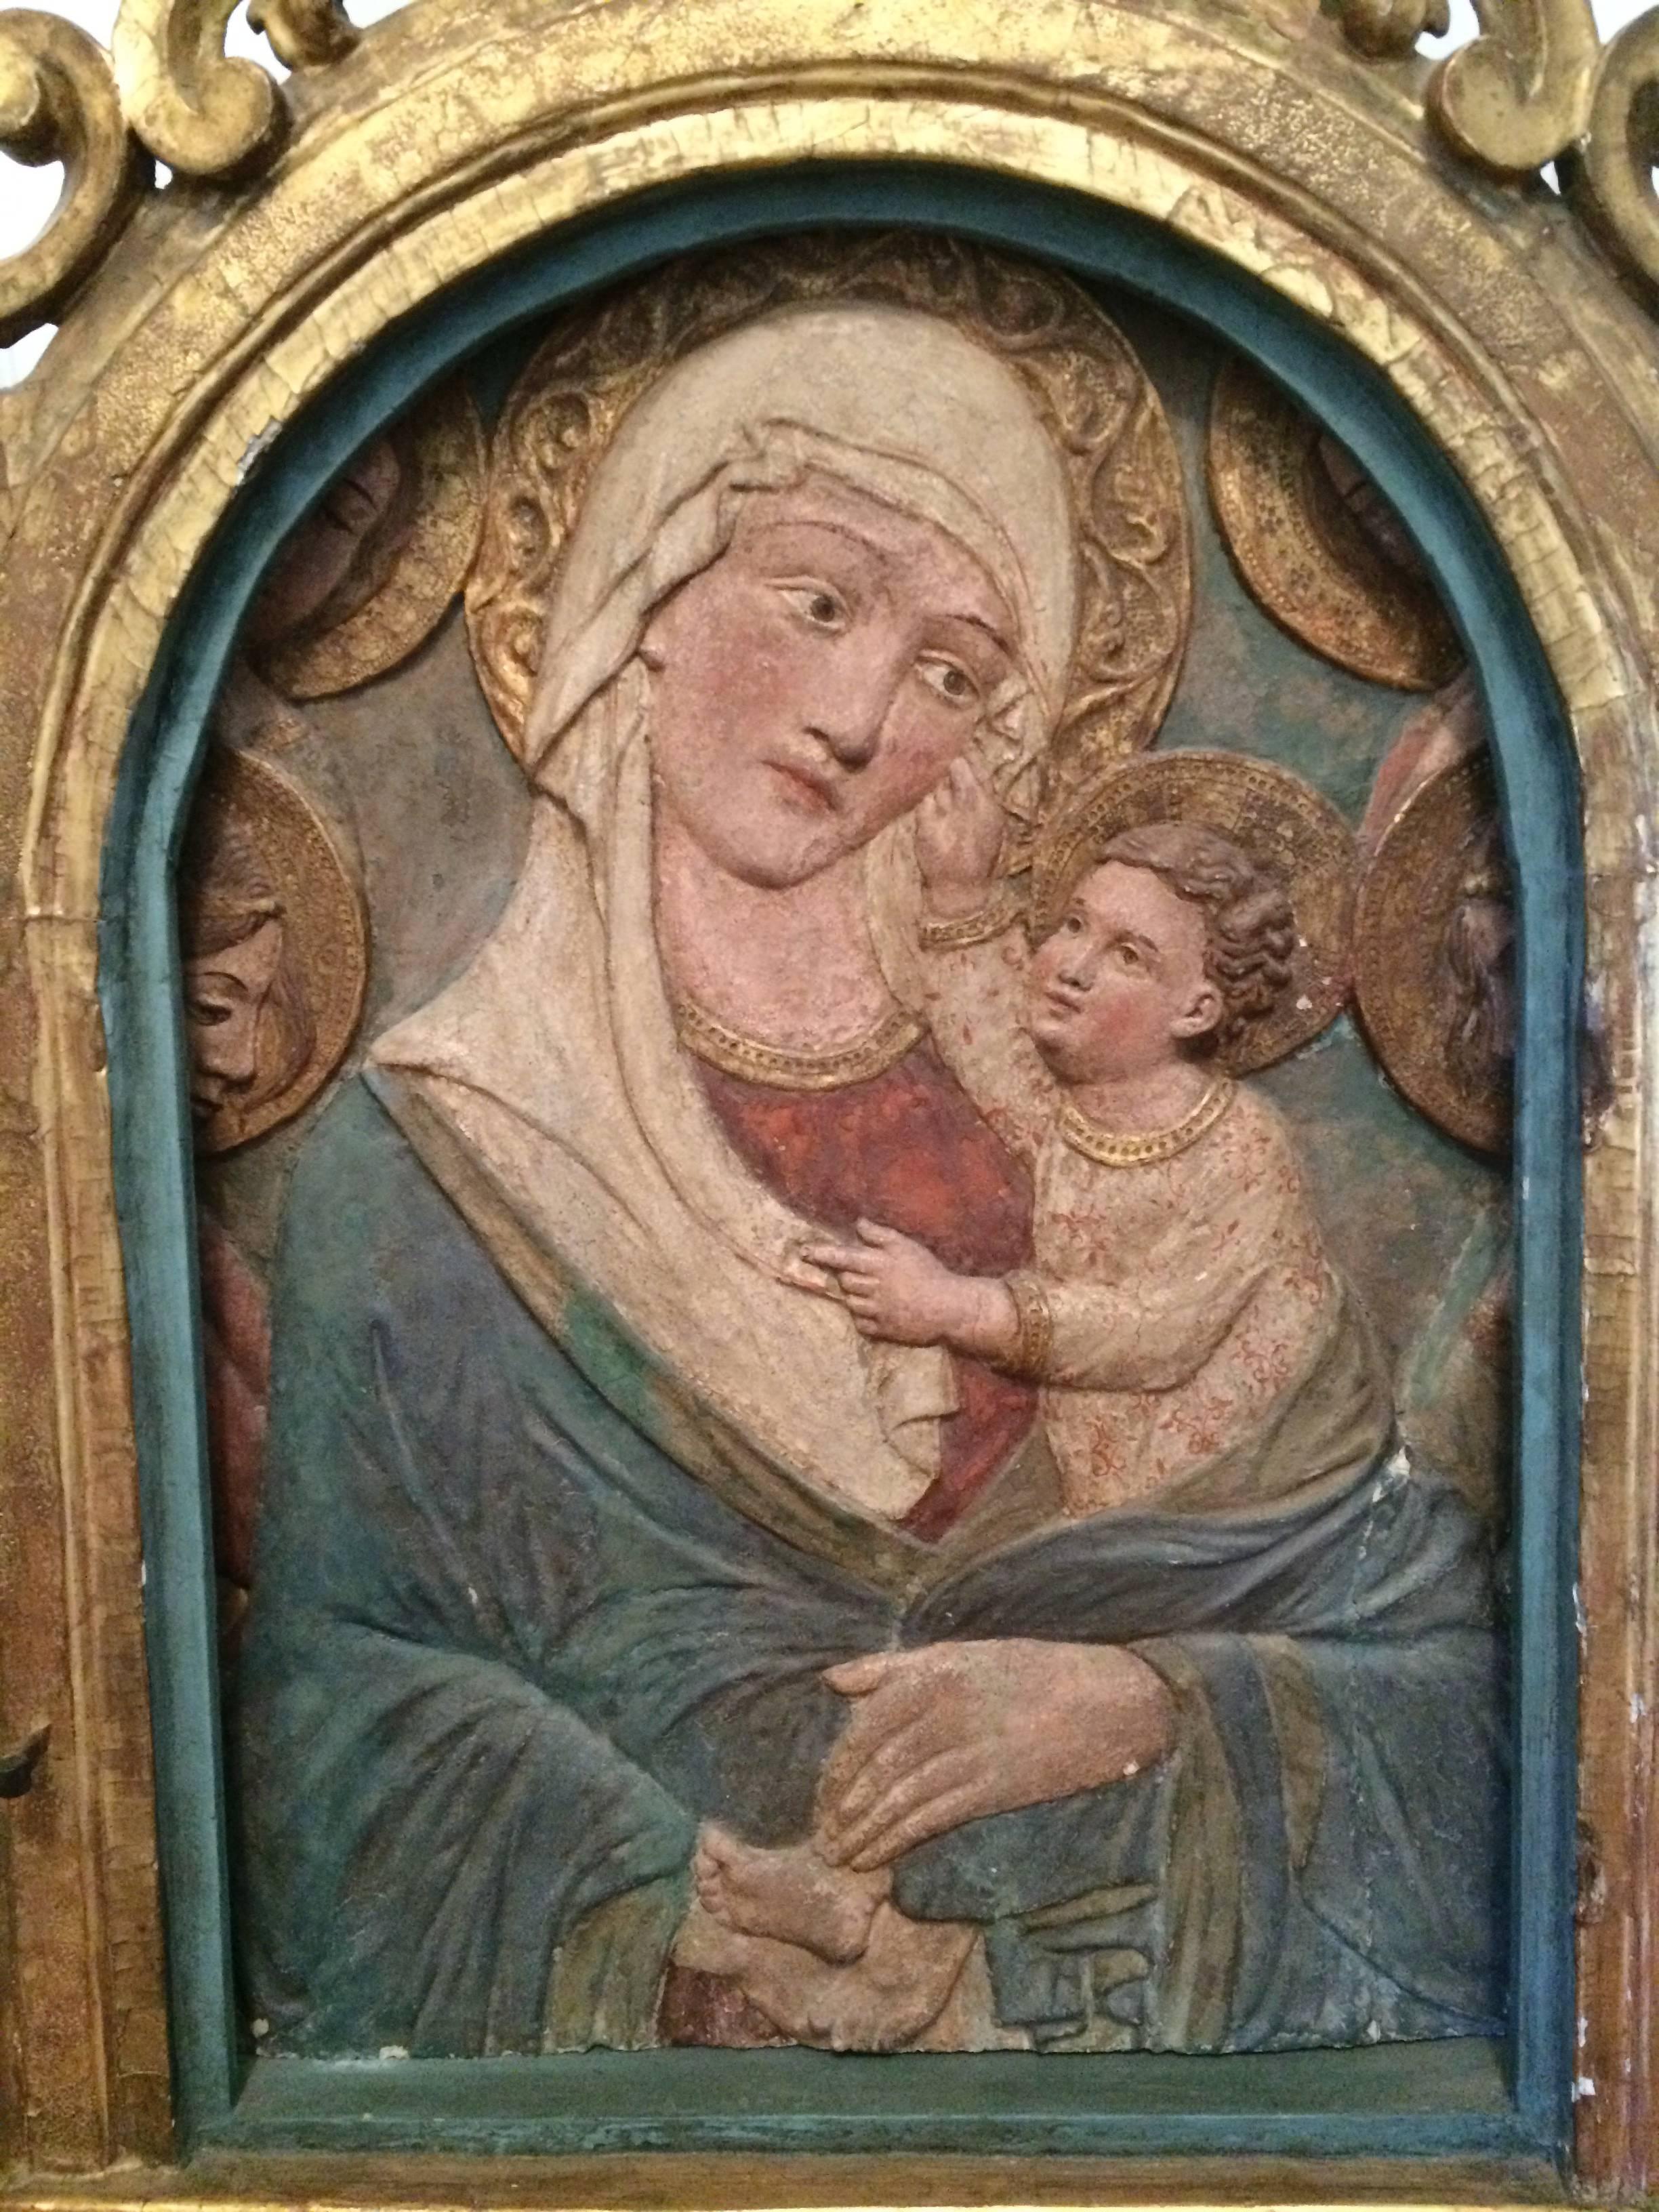 Rare Florentine 15th century stucco relief of the Madonna and Child shown surrounded by angels. With original paint set into a 17th century Italian Baroque giltwood frame.